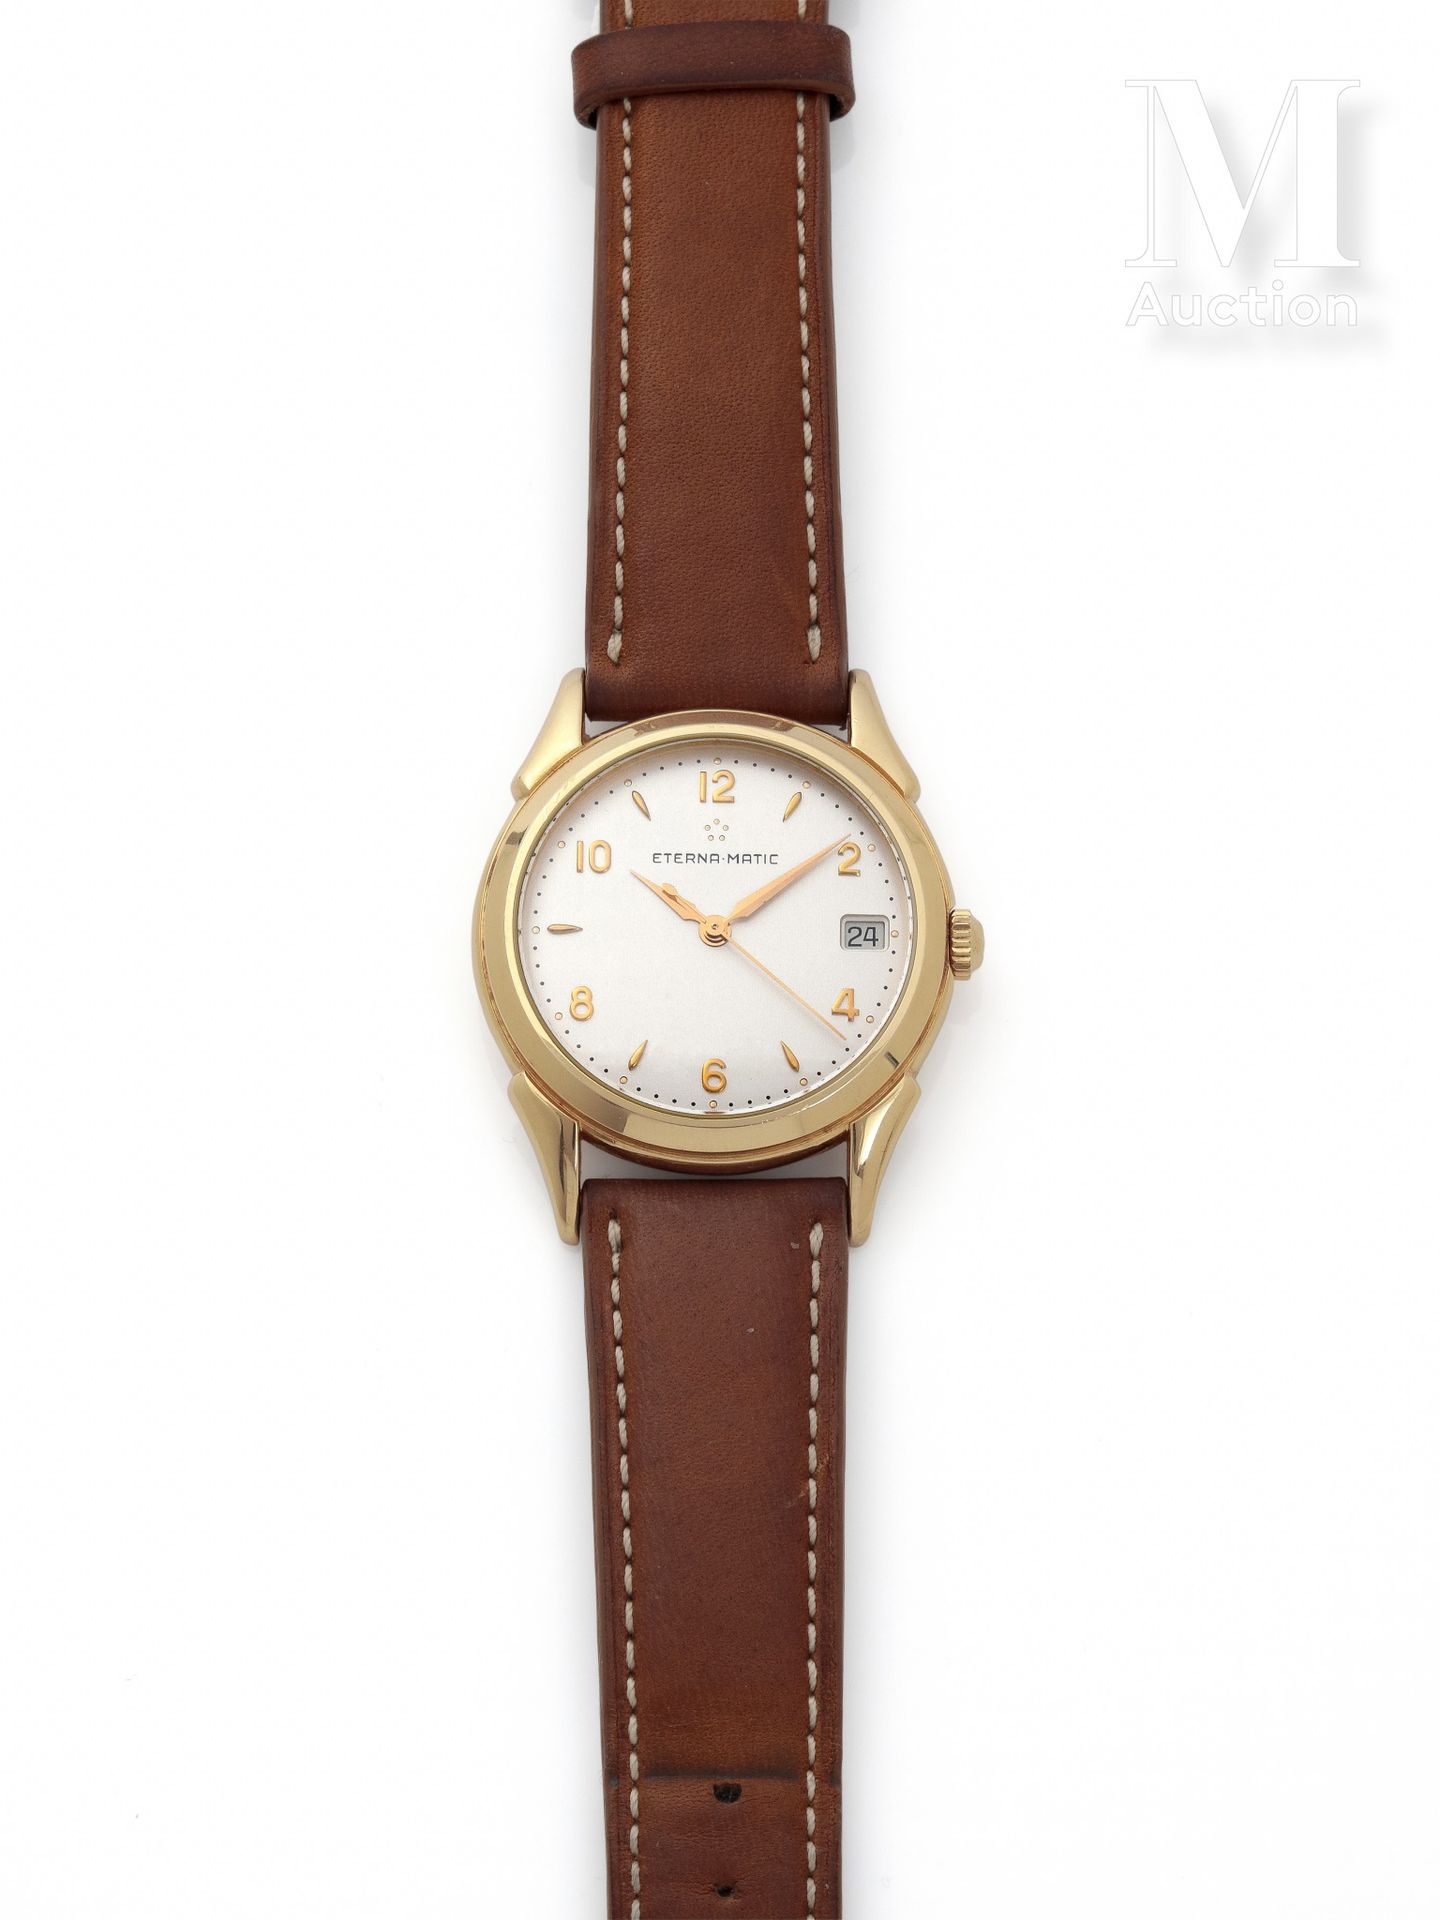 ETERNA-MATIC « 1948 »

Reference : 8400.69

Circa 1990

Modern reissue of a men'&hellip;